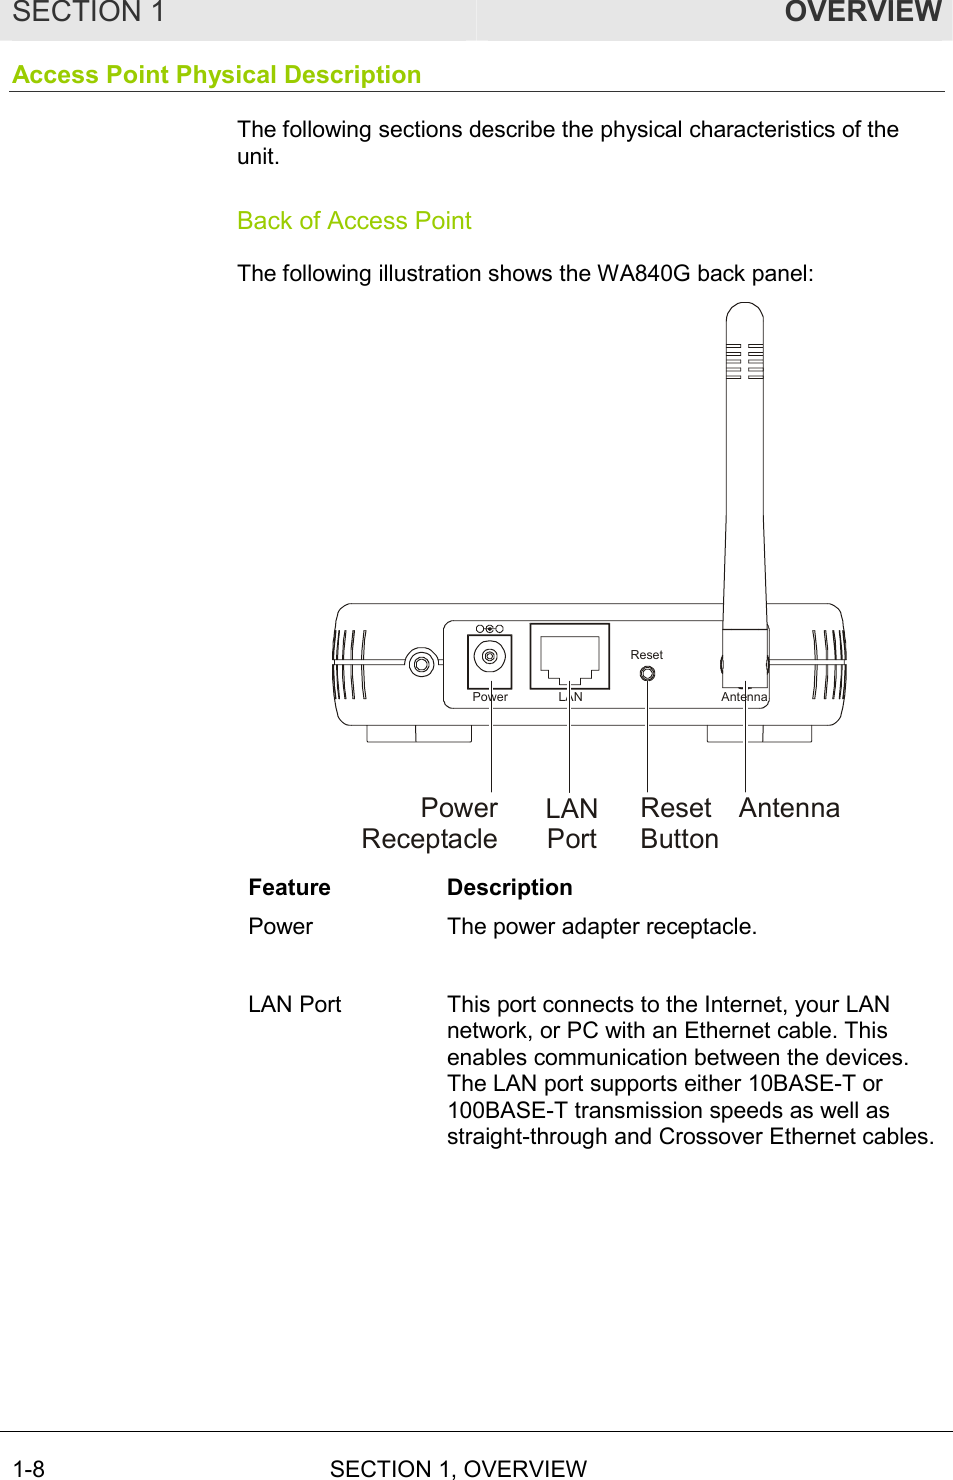 SECTION 1  OVERVIEW 1-8 SECTION 1, OVERVIEW   Access Point Physical Description The following sections describe the physical characteristics of the unit. Back of Access Point The following illustration shows the WA840G back panel: LANPowerReceptacleLANPortResetButtonAntennaPowerResetAntenna Feature Description Power  The power adapter receptacle.  LAN Port  This port connects to the Internet, your LAN network, or PC with an Ethernet cable. This enables communication between the devices. The LAN port supports either 10BASE-T or 100BASE-T transmission speeds as well as straight-through and Crossover Ethernet cables.  